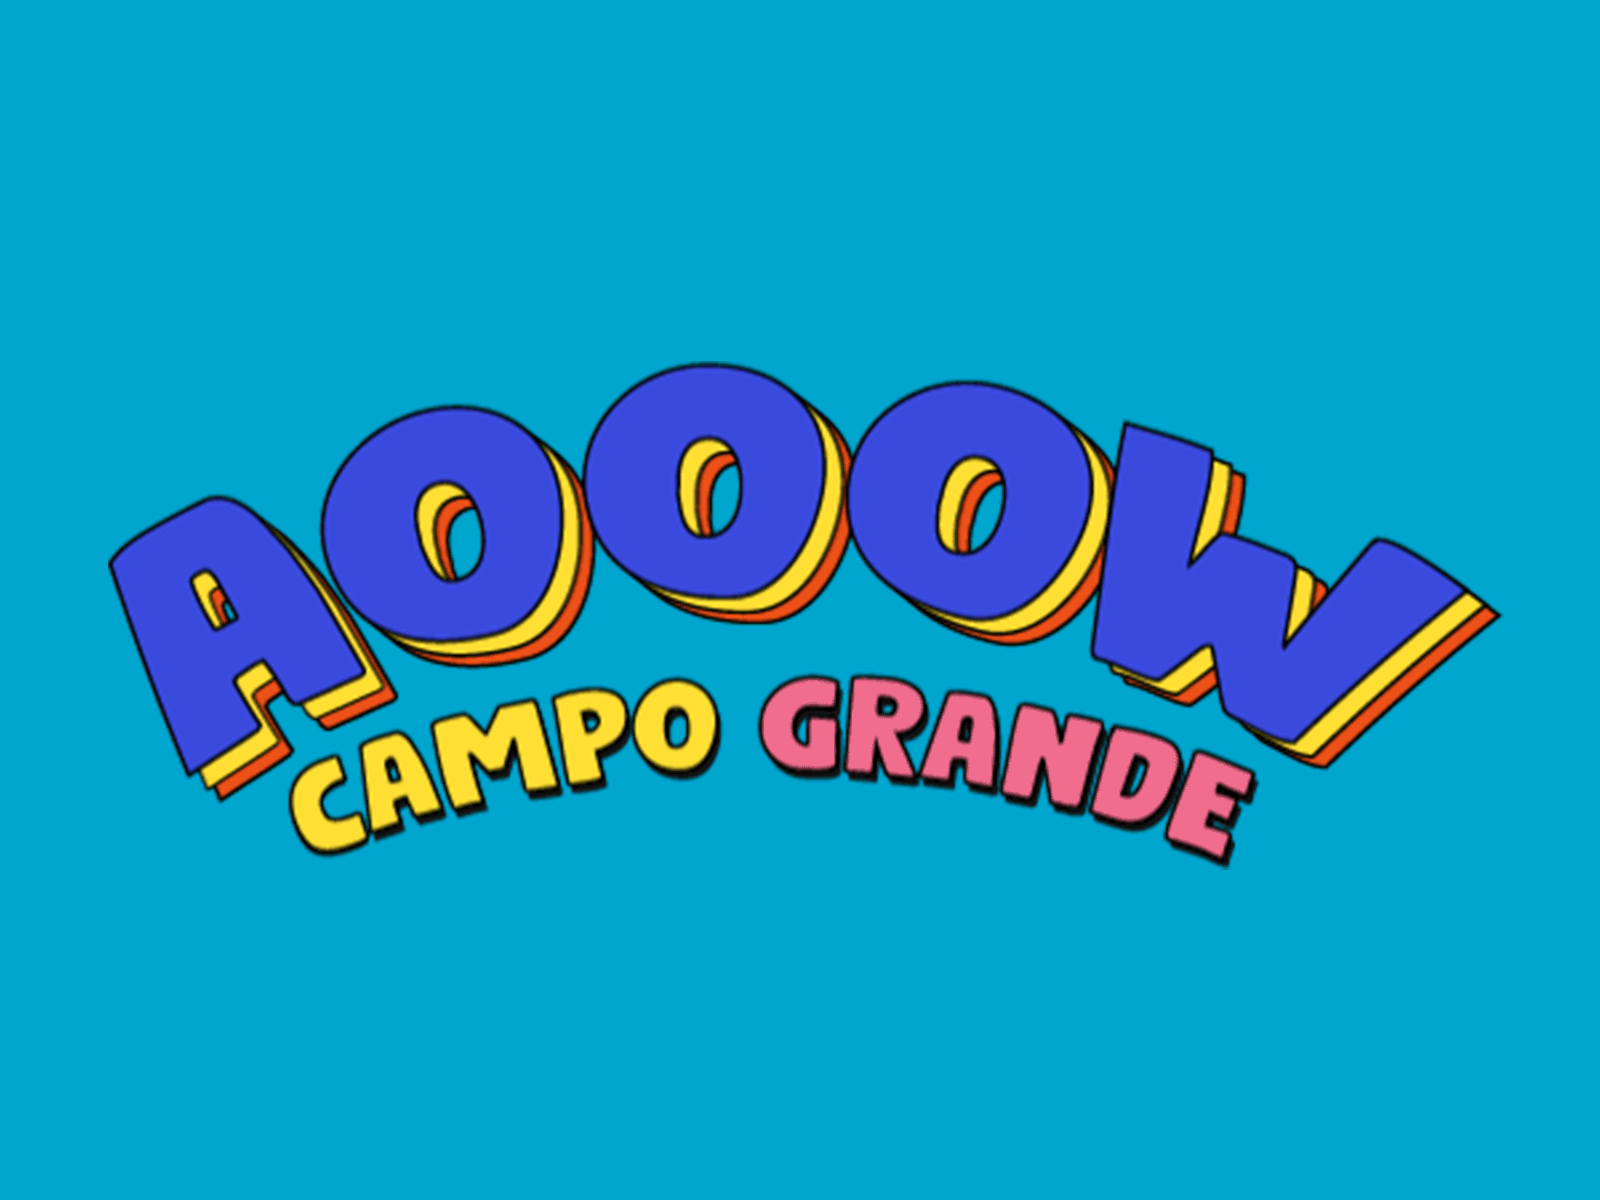 AOOOW campo grande lettering motion qoutes